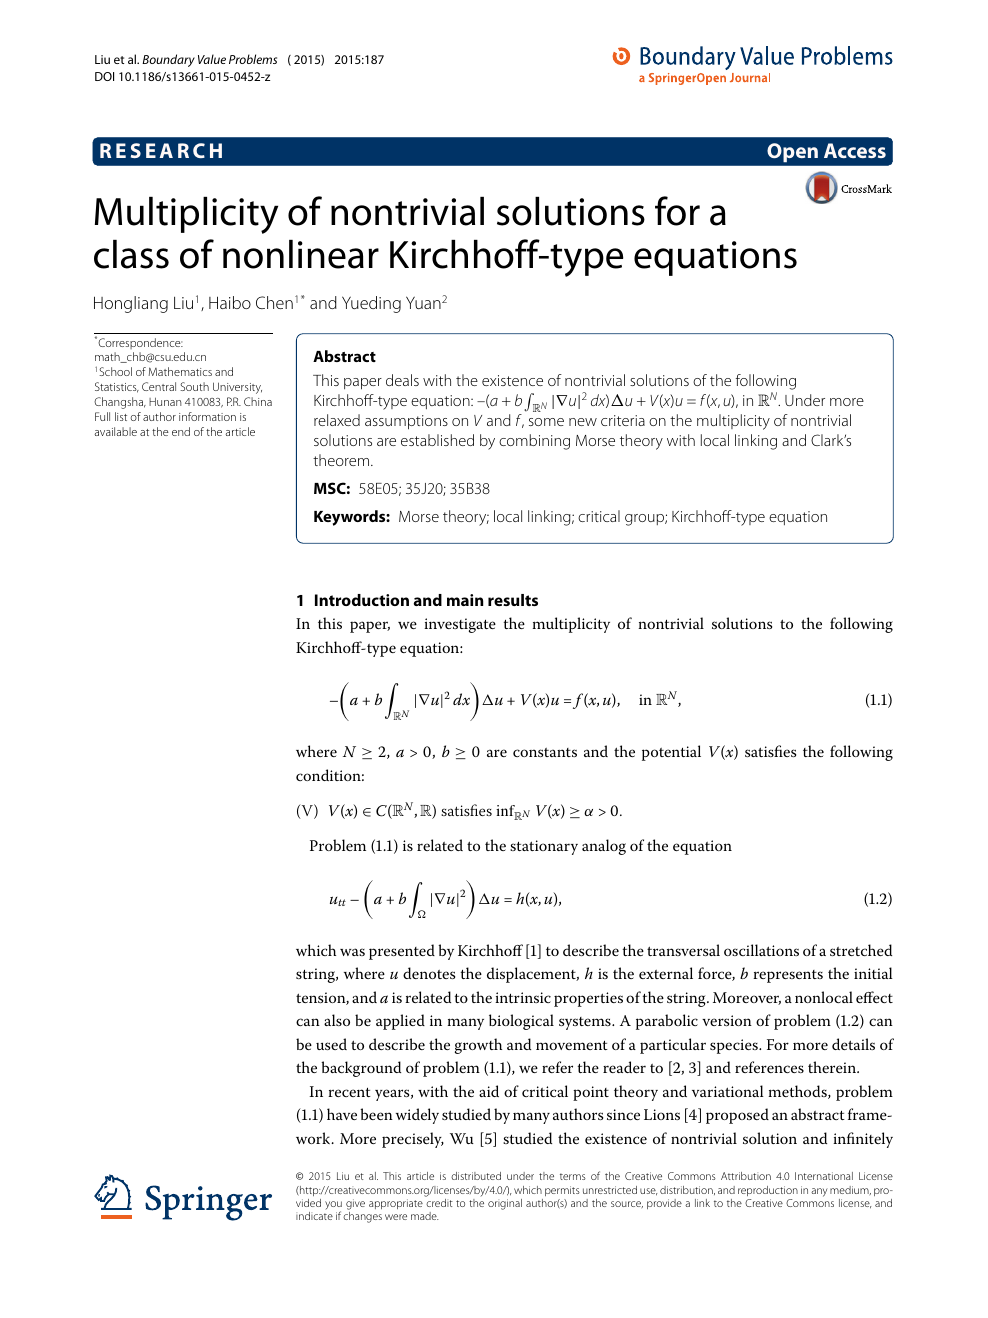 Multiplicity Of Nontrivial Solutions For A Class Of Nonlinear Kirchhoff Type Equations Topic Of Research Paper In Mathematics Download Scholarly Article Pdf And Read For Free On Cyberleninka Open Science Hub